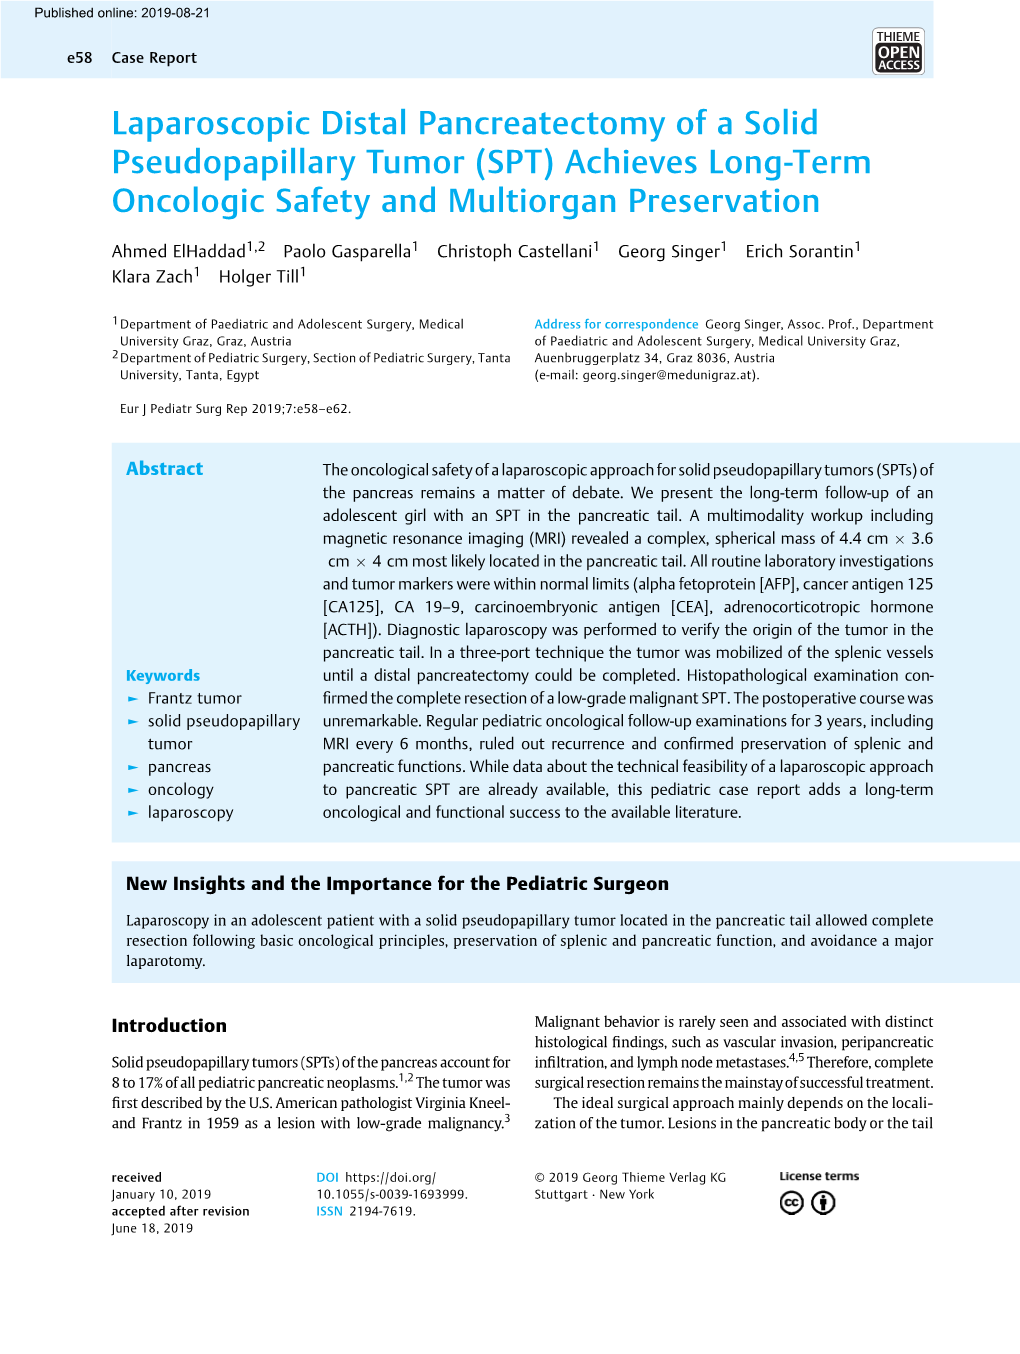 Laparoscopic Distal Pancreatectomy of a Solid Pseudopapillary Tumor (SPT) Achieves Long-Term Oncologic Safety and Multiorgan Preservation